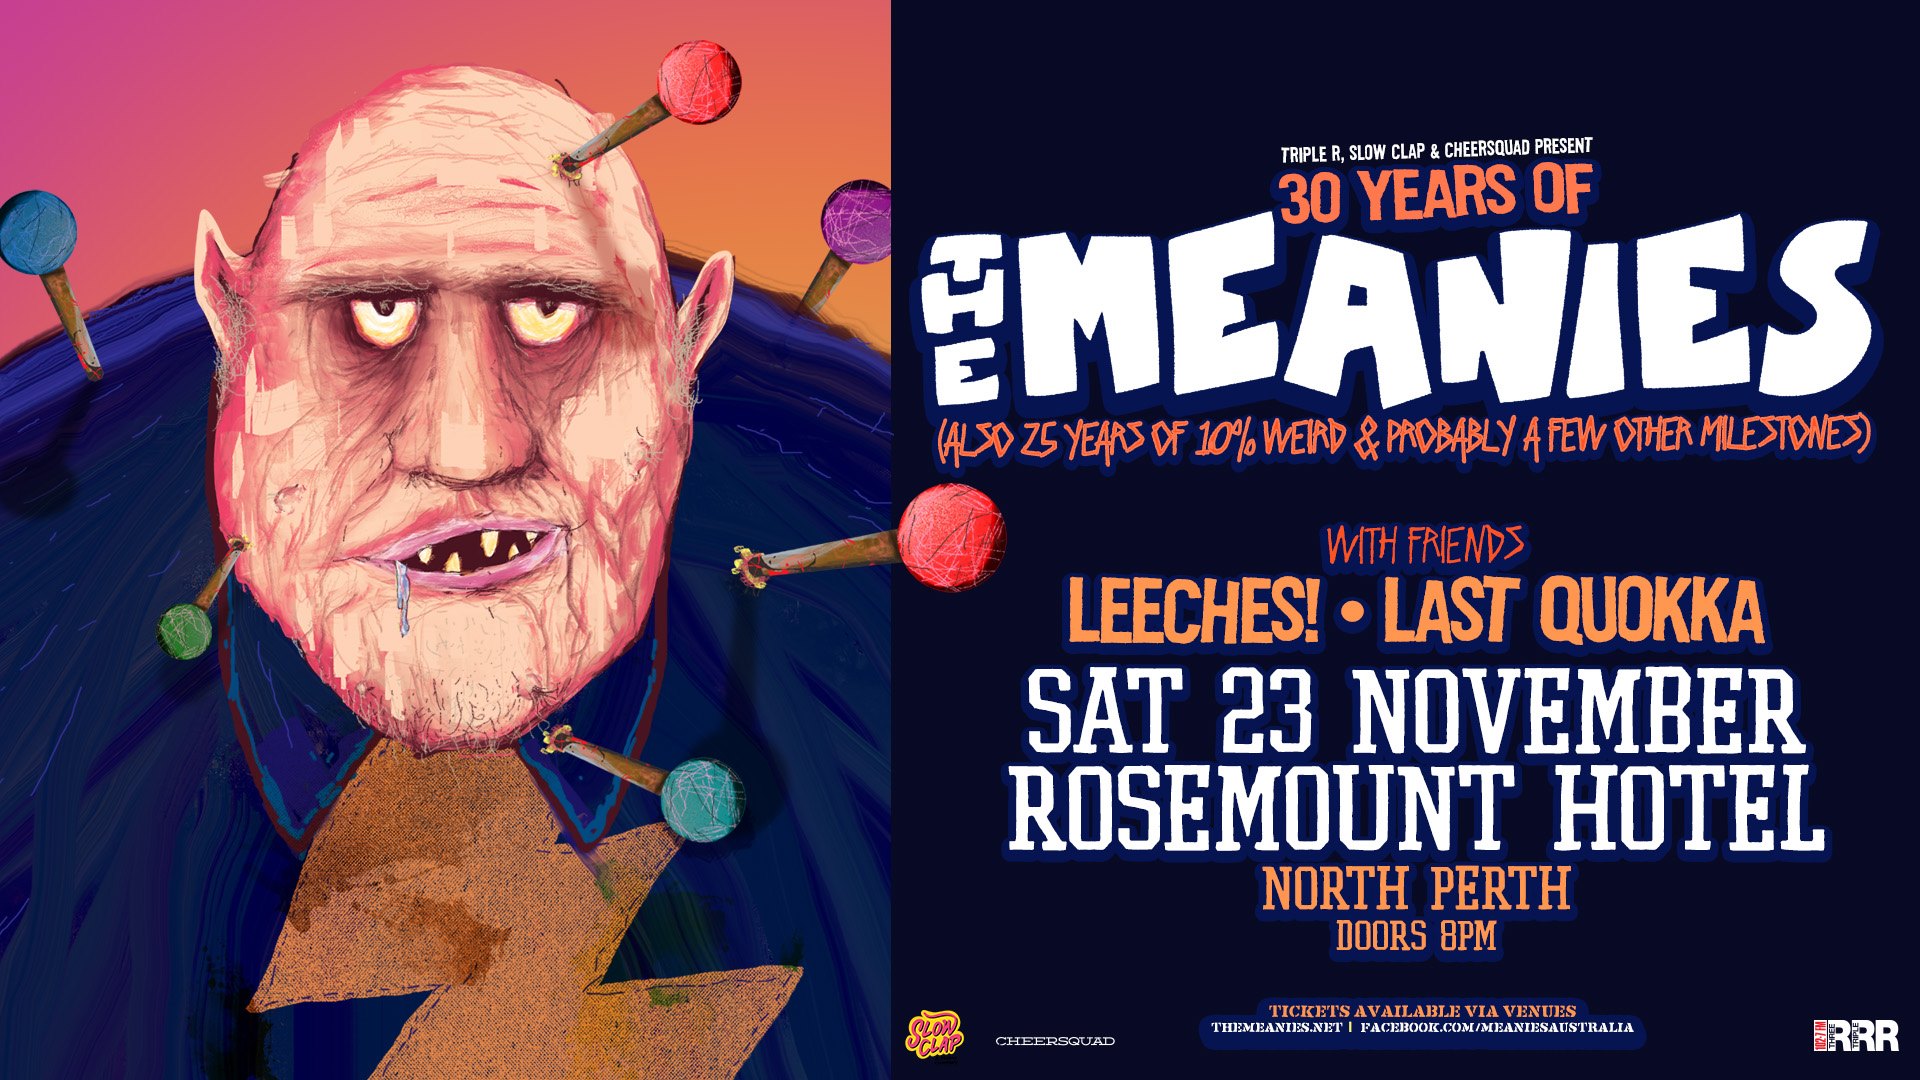 30 Years of The Meanies!